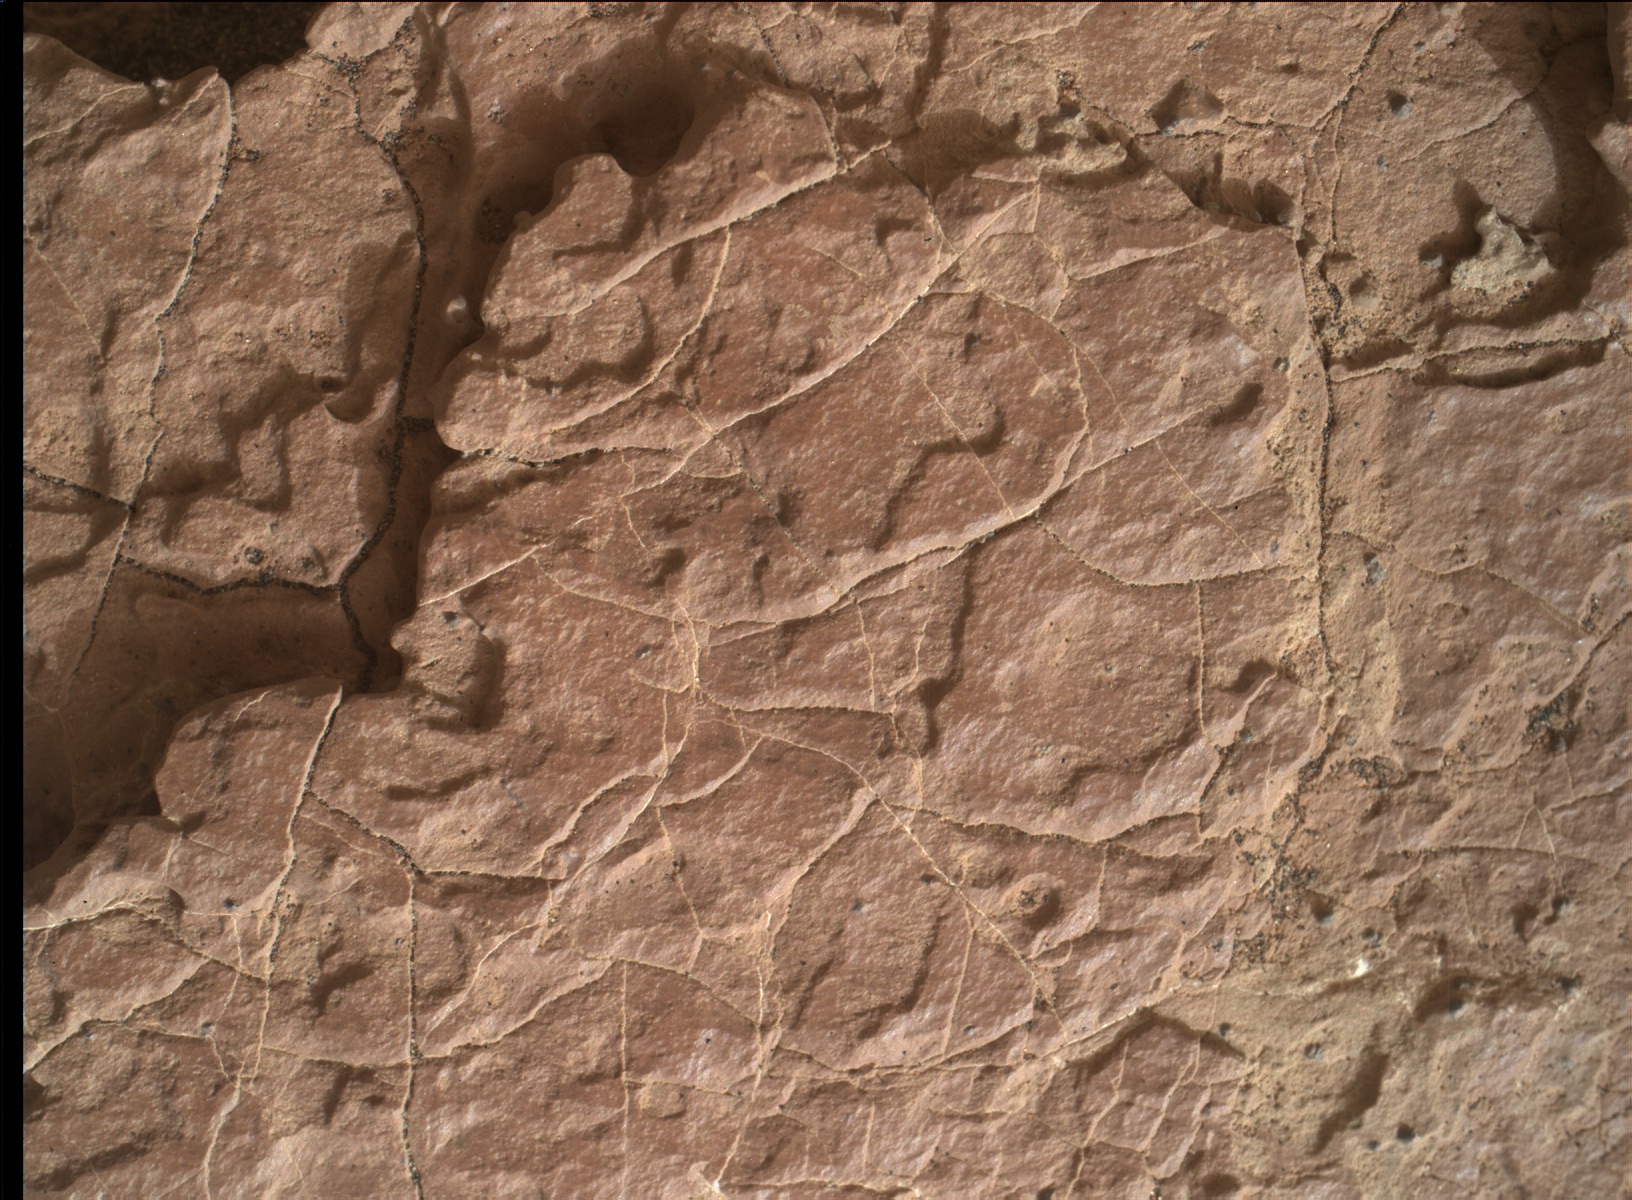 Nasa's Mars rover Curiosity acquired this image using its Mars Hand Lens Imager (MAHLI) on Sol 1634